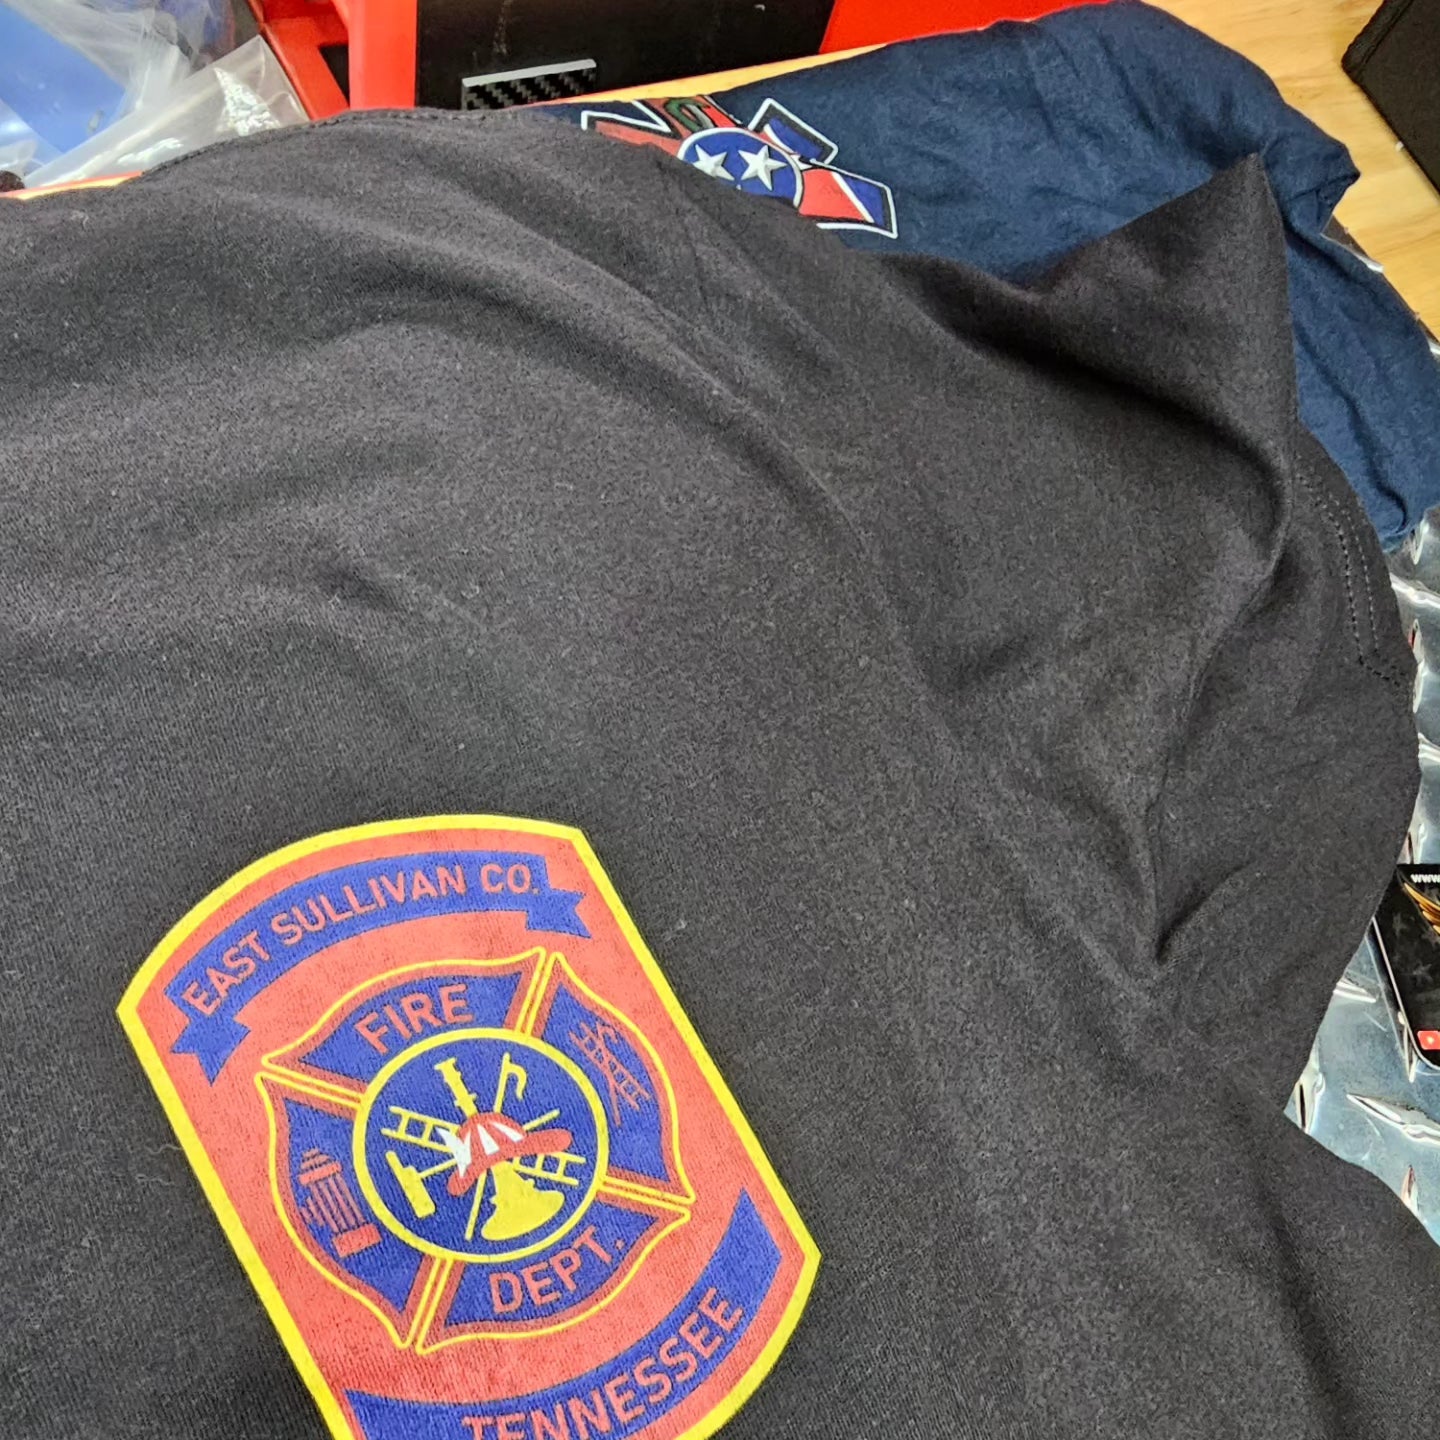 Tennessee - Personalized Fire Department Shirt - American Responder Designs